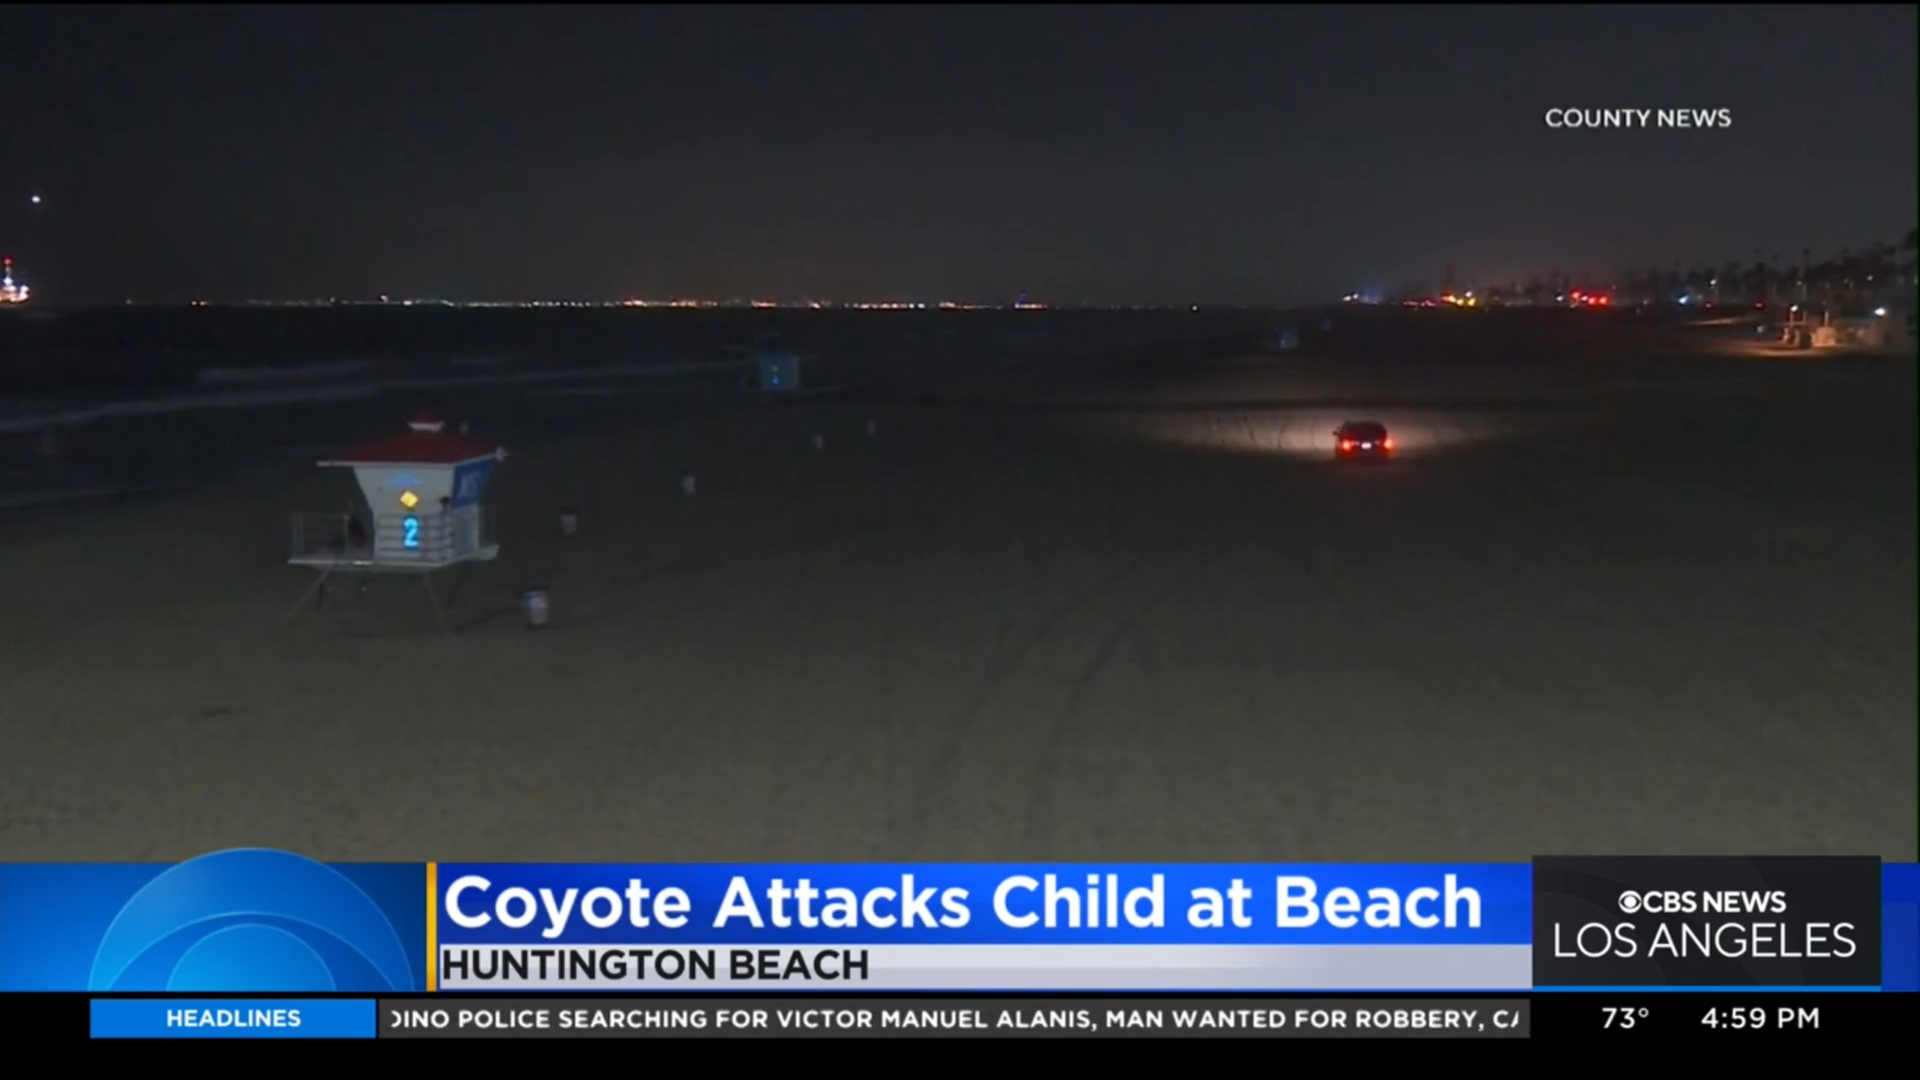 anvato-6232909-authorities-capture-coyote-that-attacked-girl-near-huntington-beach-pier-52-2522.png?v/u003d42bbcea0e3eaab3fb7d470f54c86b0bd pic